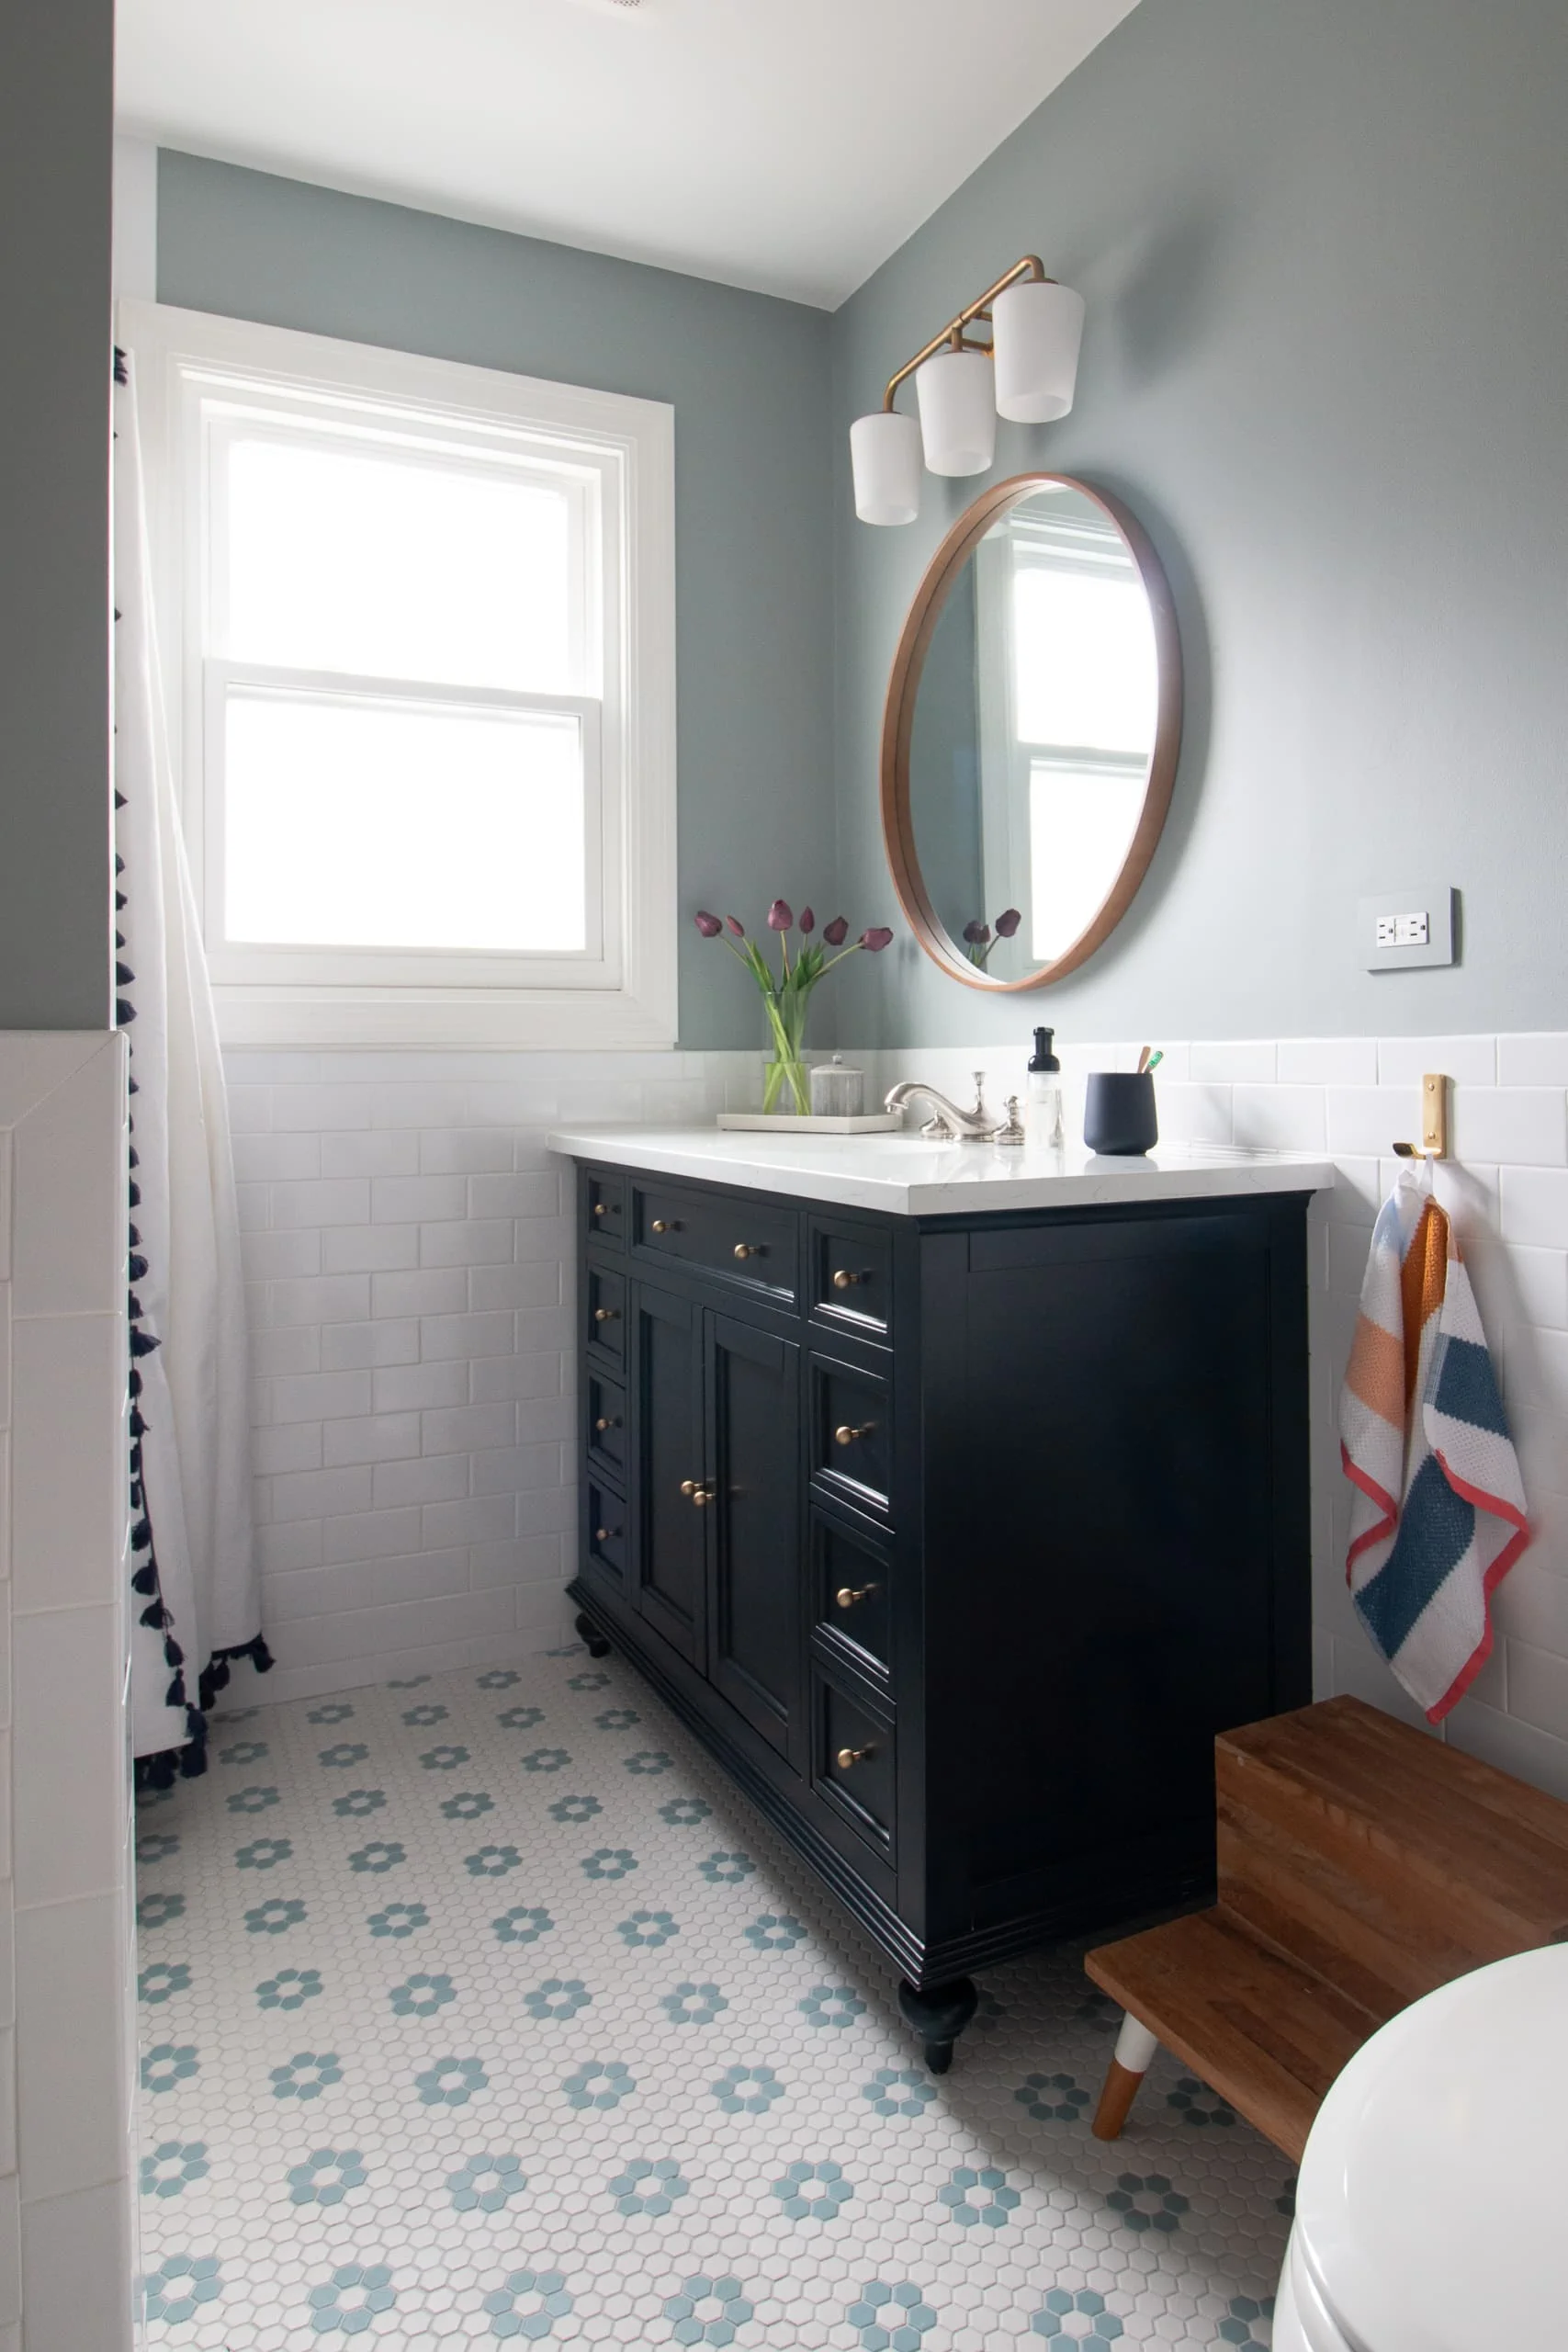 Our kids' bathroom is painted the color Boothbay Gray